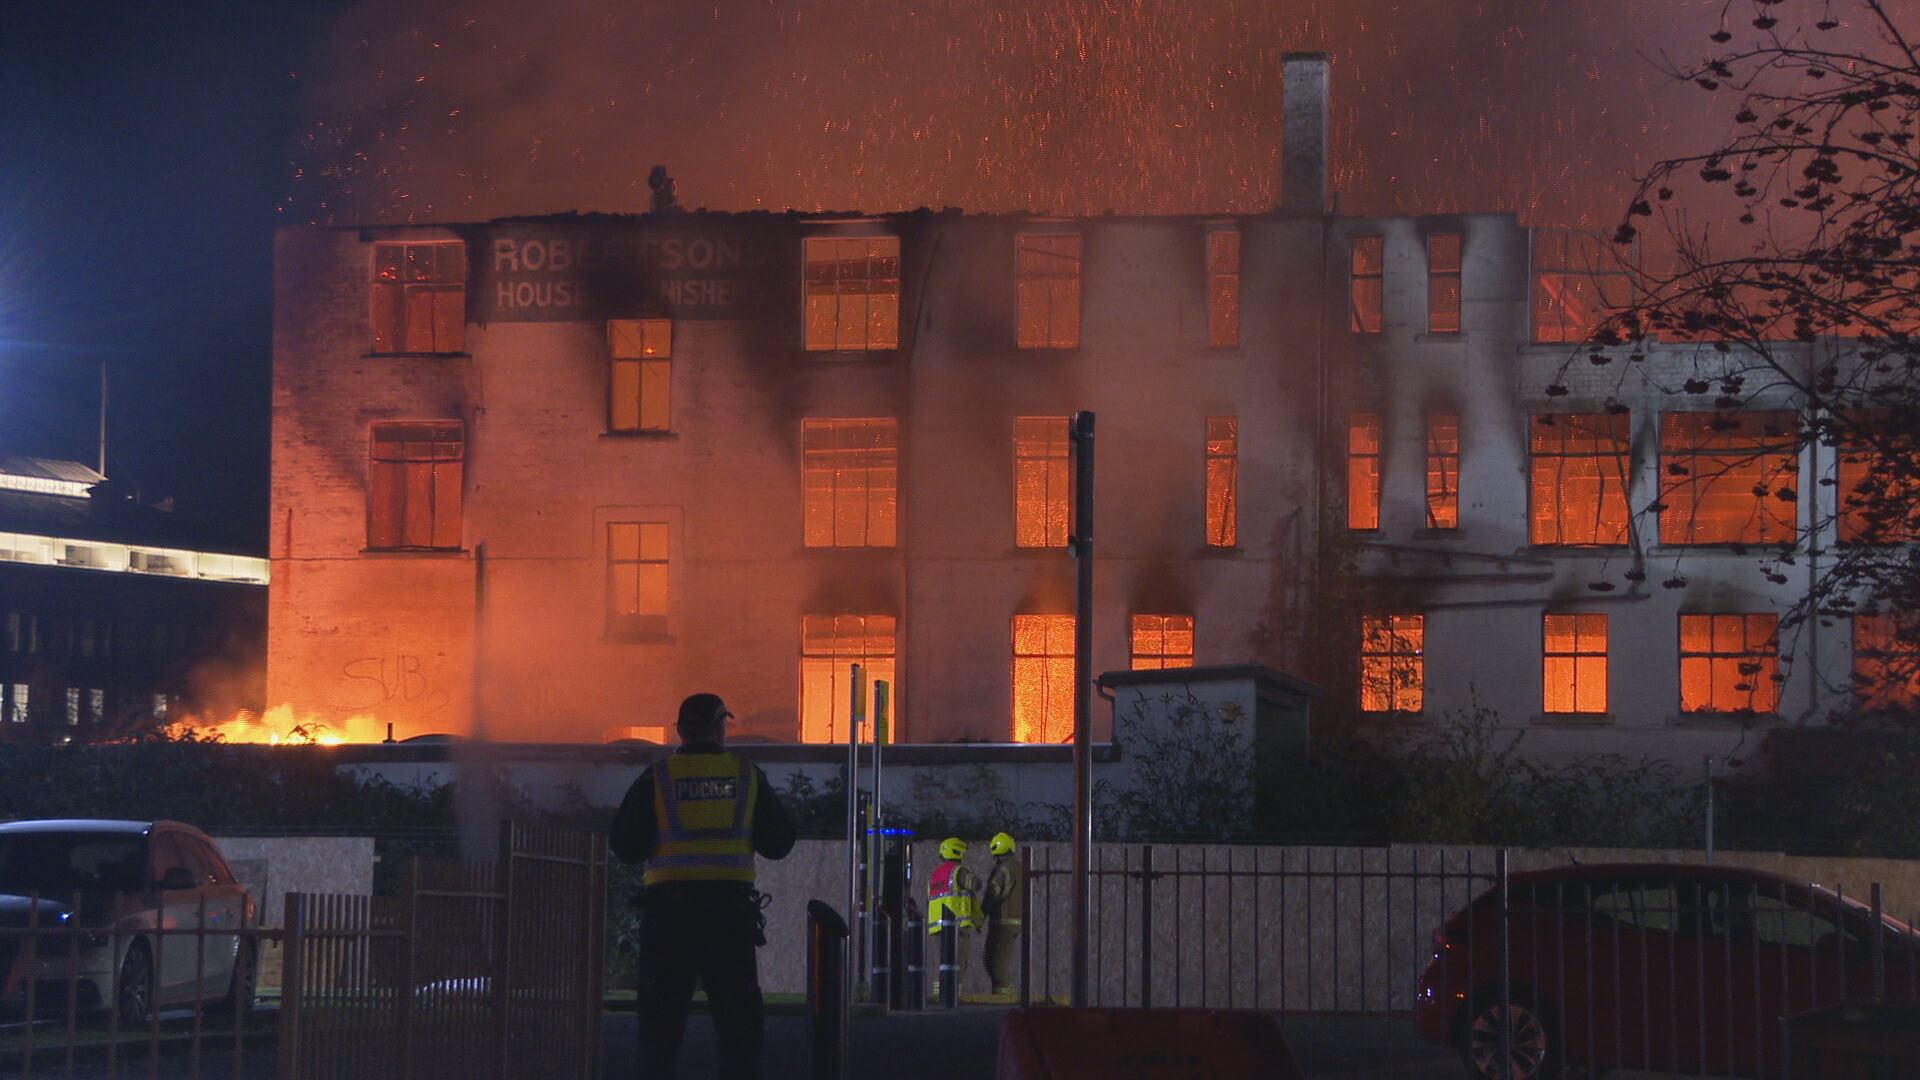 More than 50 firefighters battled the flames which broke out at 6pm on Saturday.